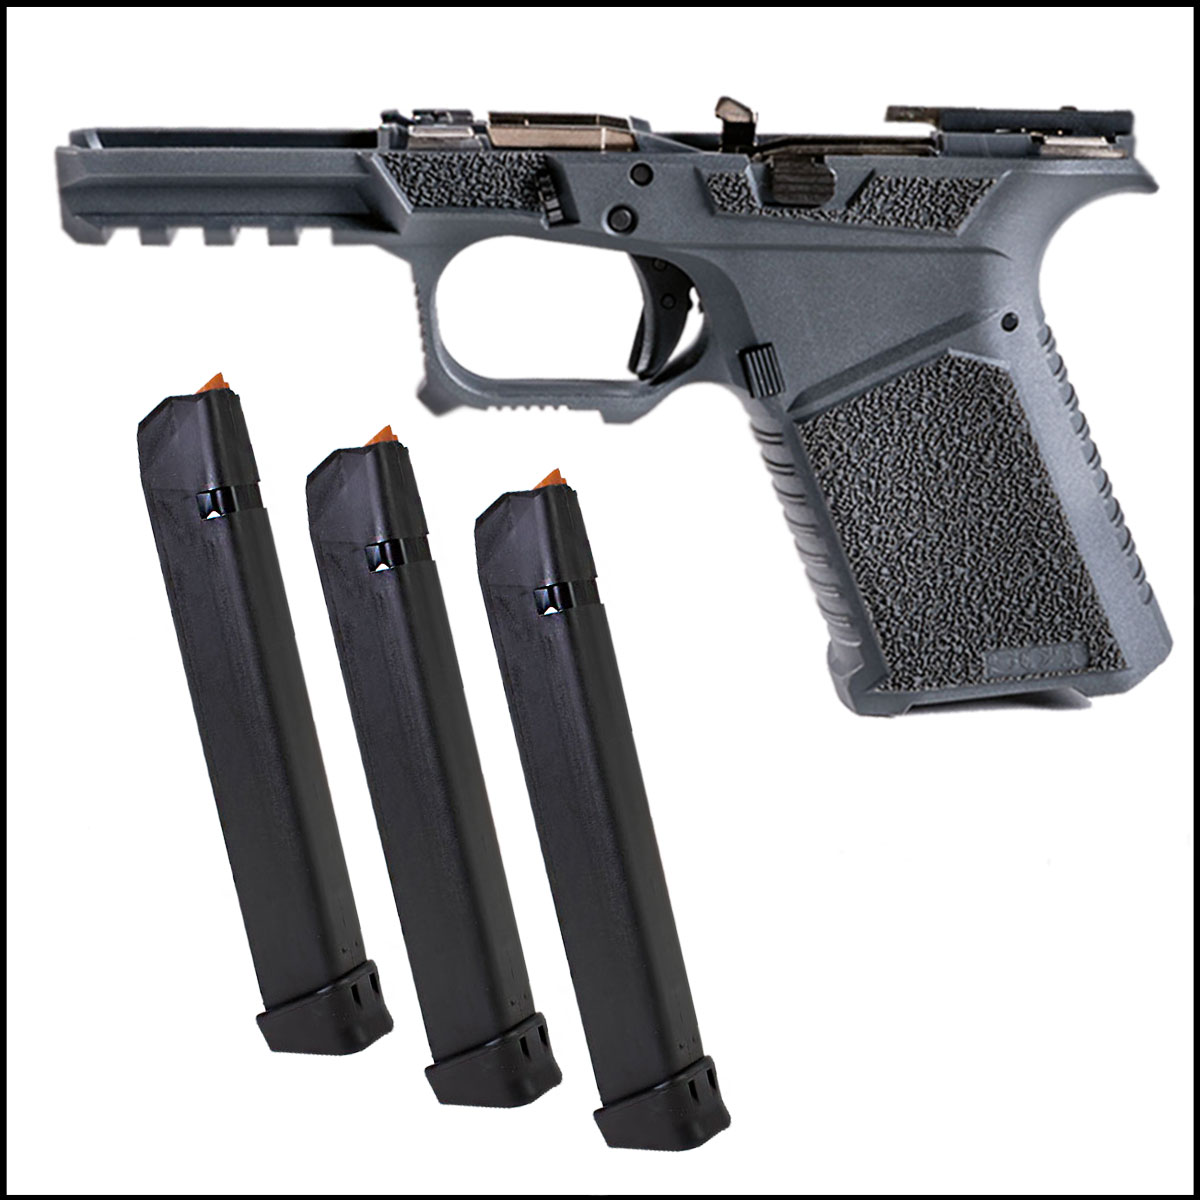 DIY Pistol Kit: SCT Manufacturing Full Frame Assembly + GLOCK Glock Magazine, 33 Round Capacity, 9mm Double Stack, 3-Pack